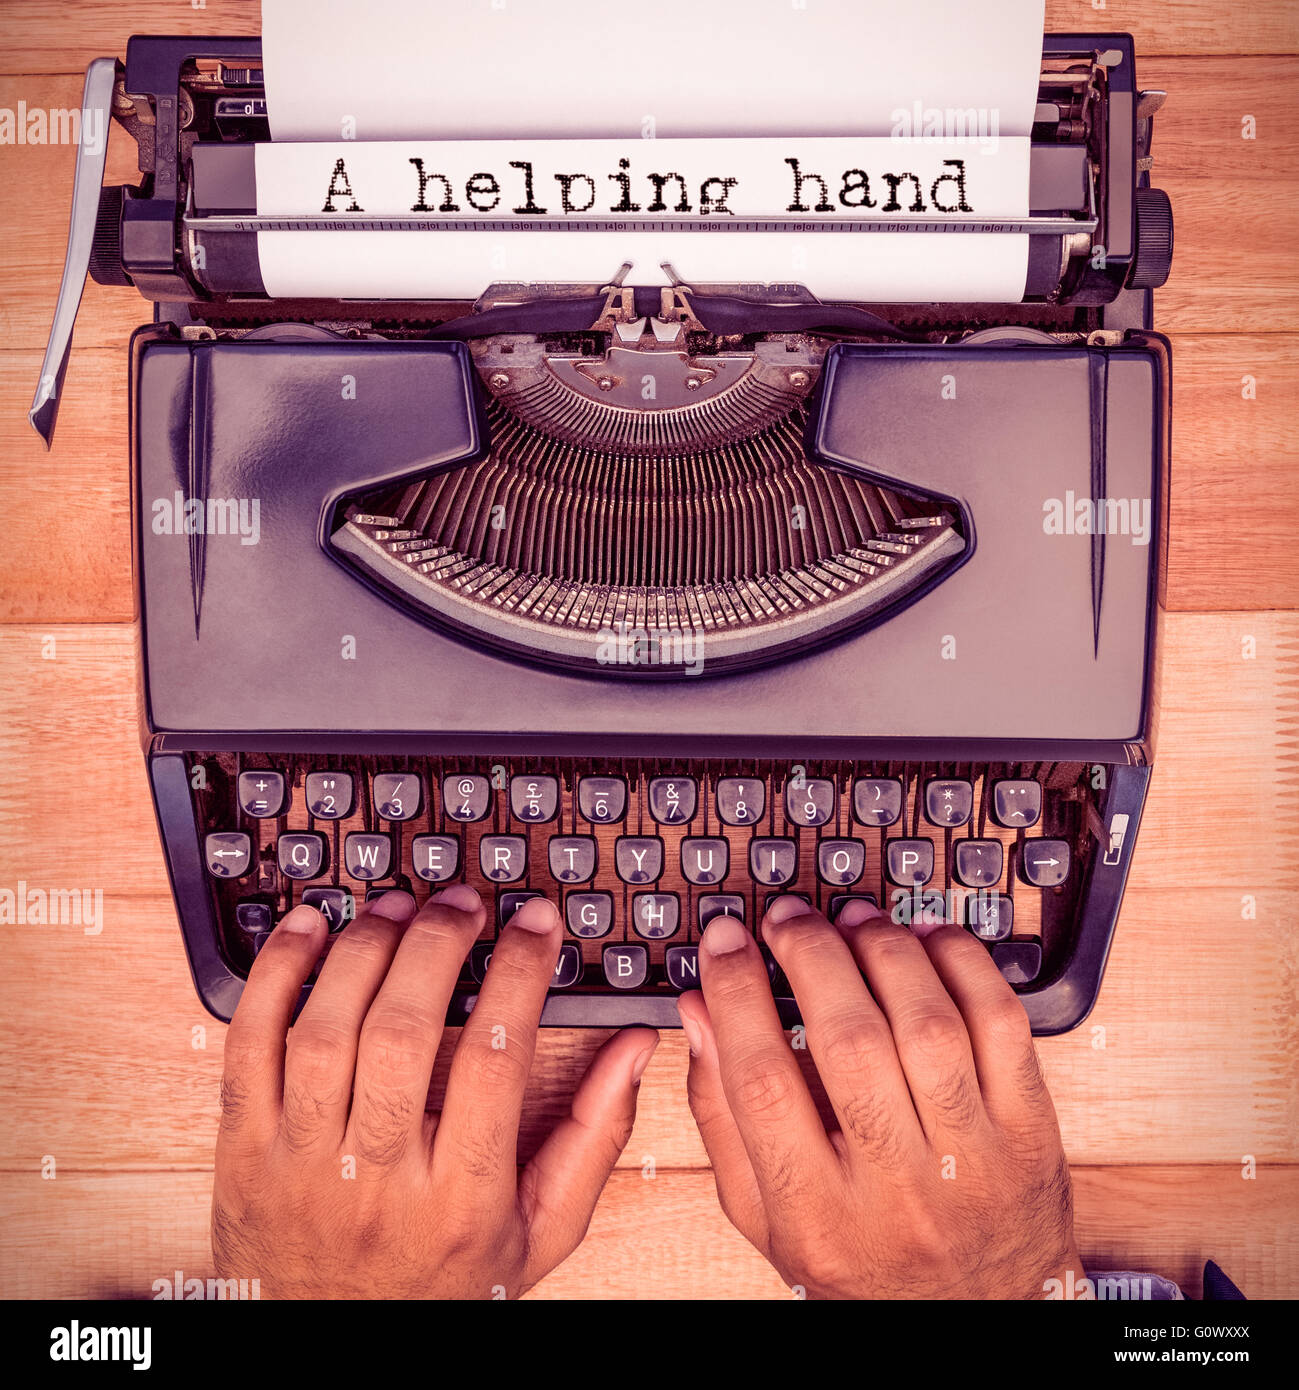 Composite image of a helping hand message Stock Photo